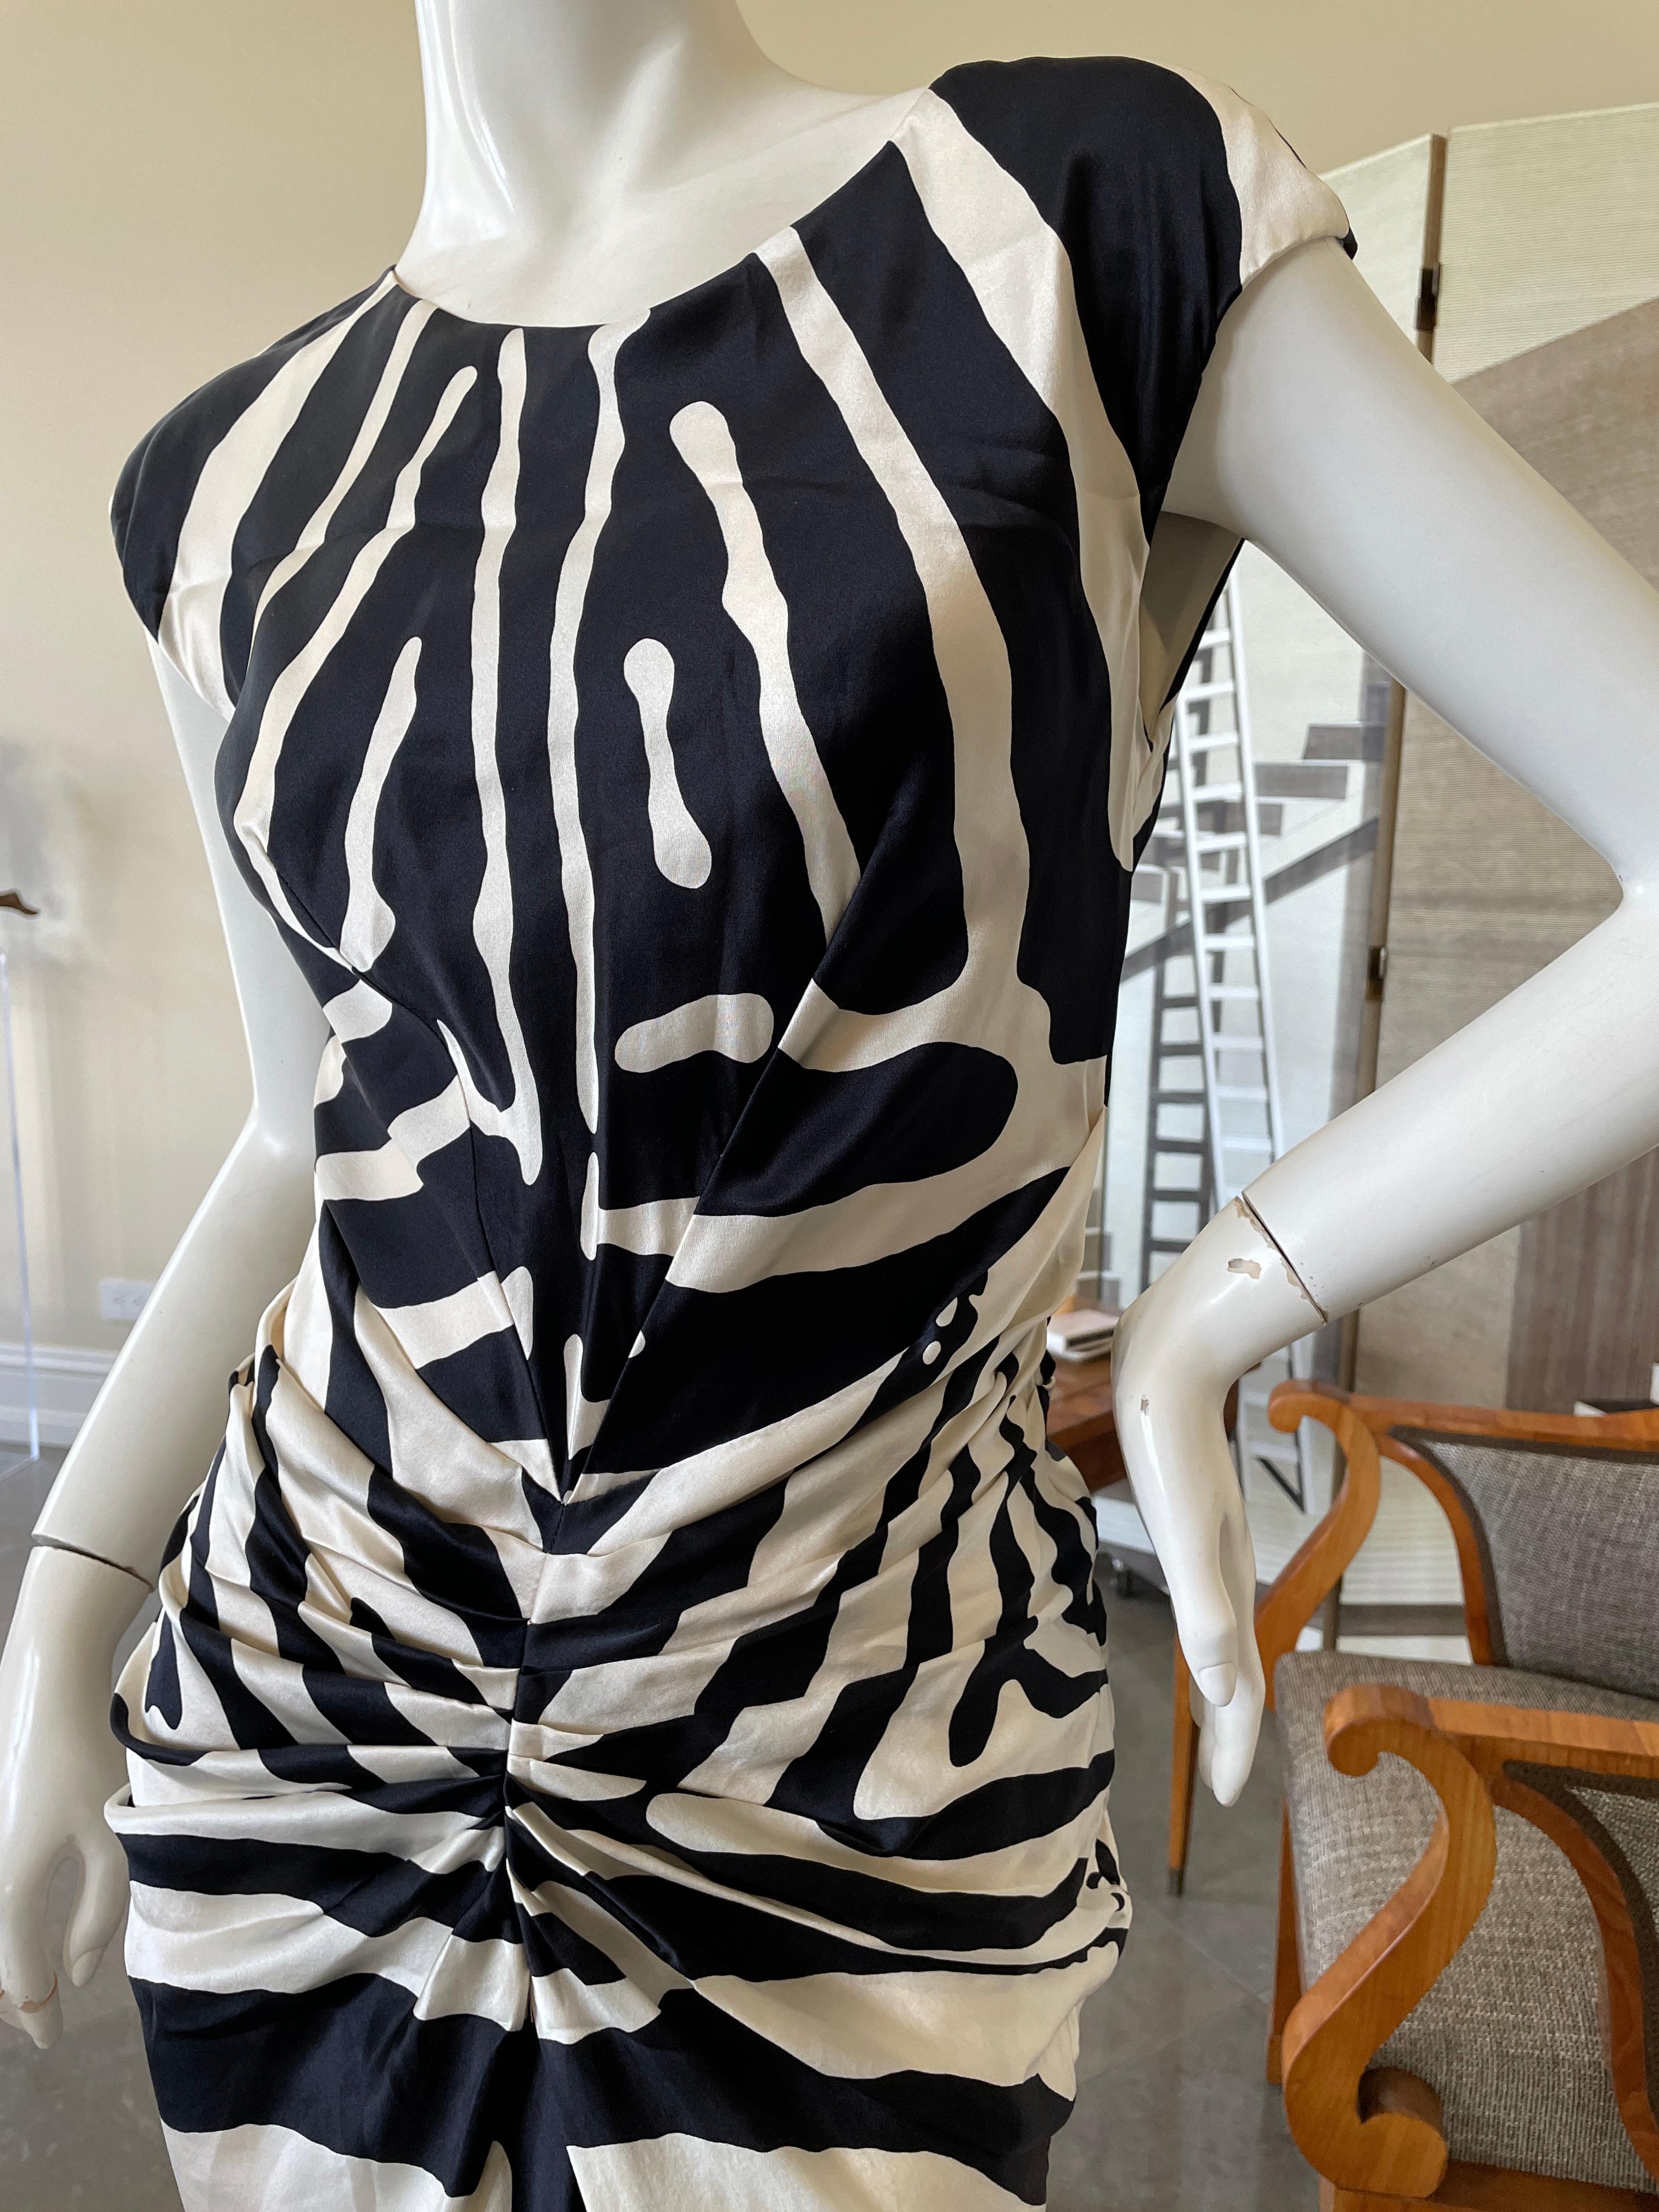 Christian Dior by Galliano SS 2008 Zebra Stripe Silk Cocktail Dress  In Excellent Condition For Sale In Cloverdale, CA